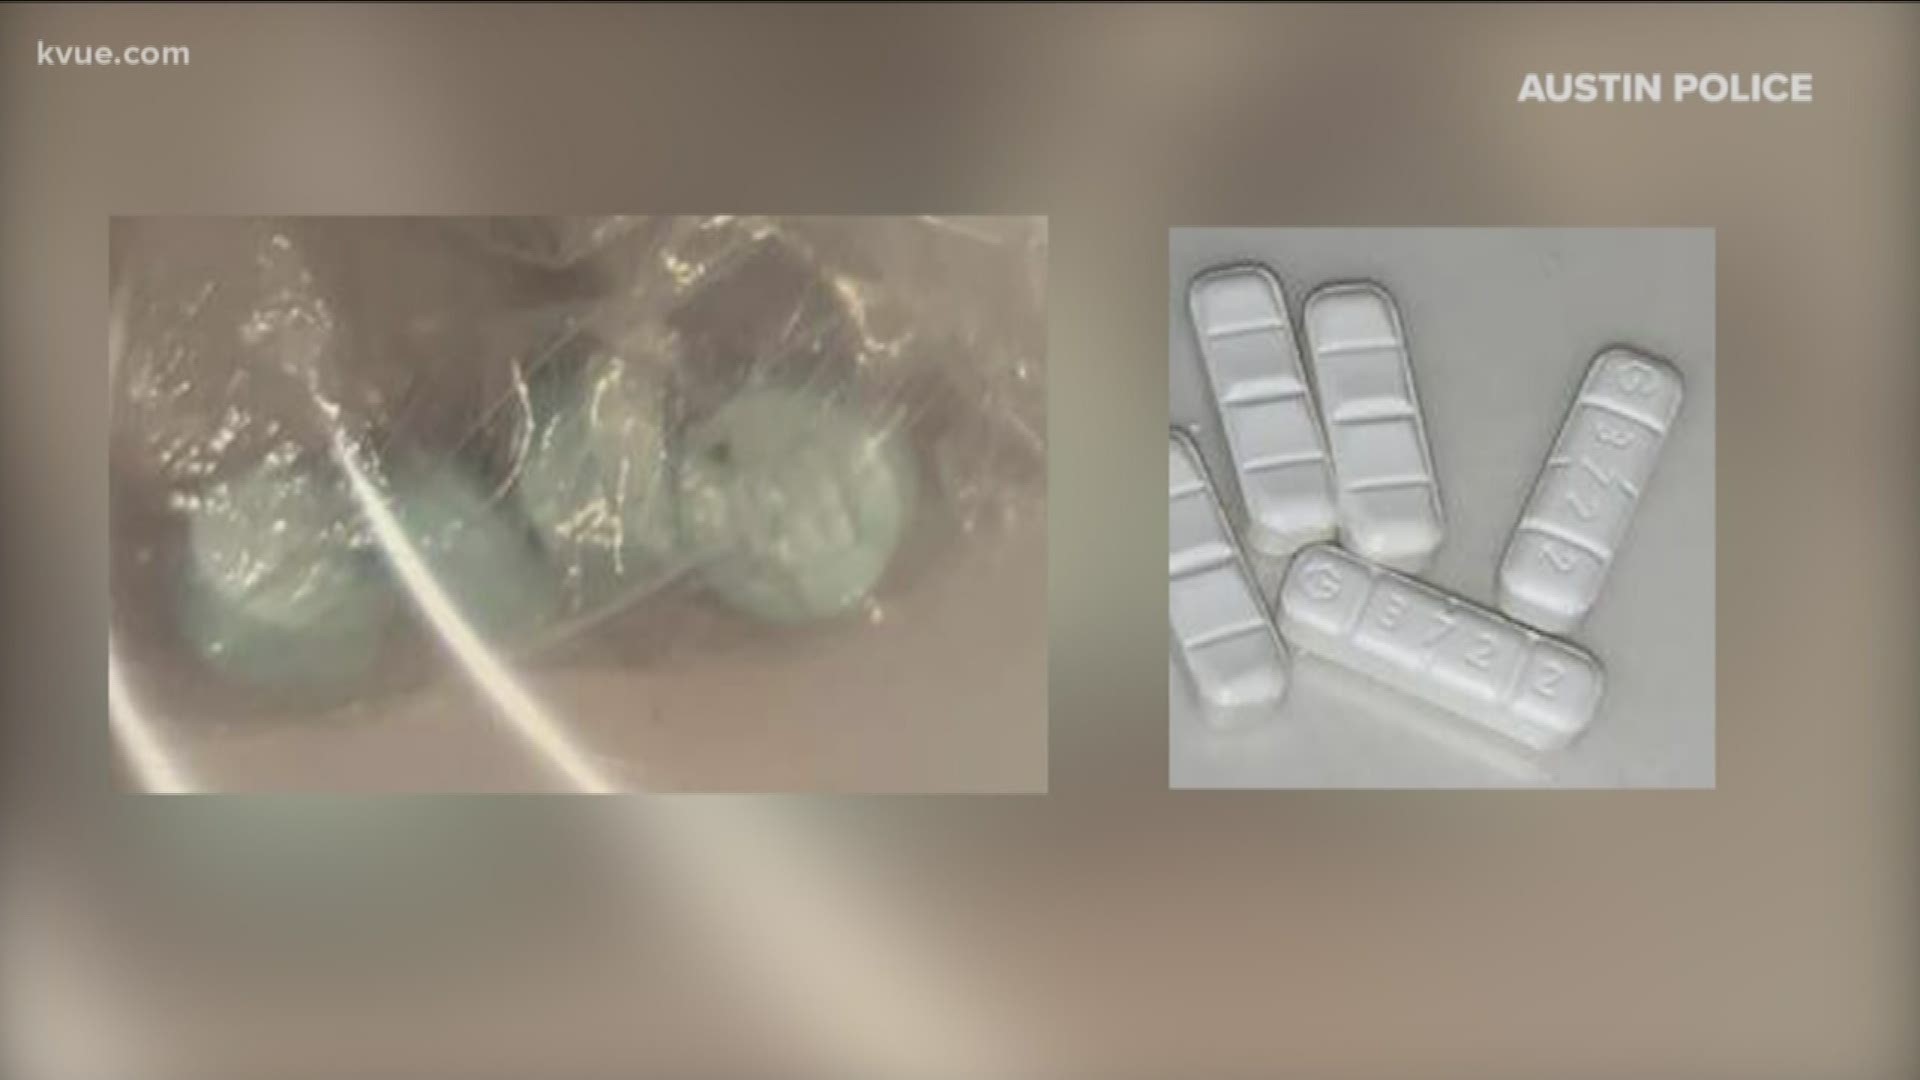 Authorities said fentanyl-laced counterfeit oxycodone and Xanax pills are tied to the overdoses.